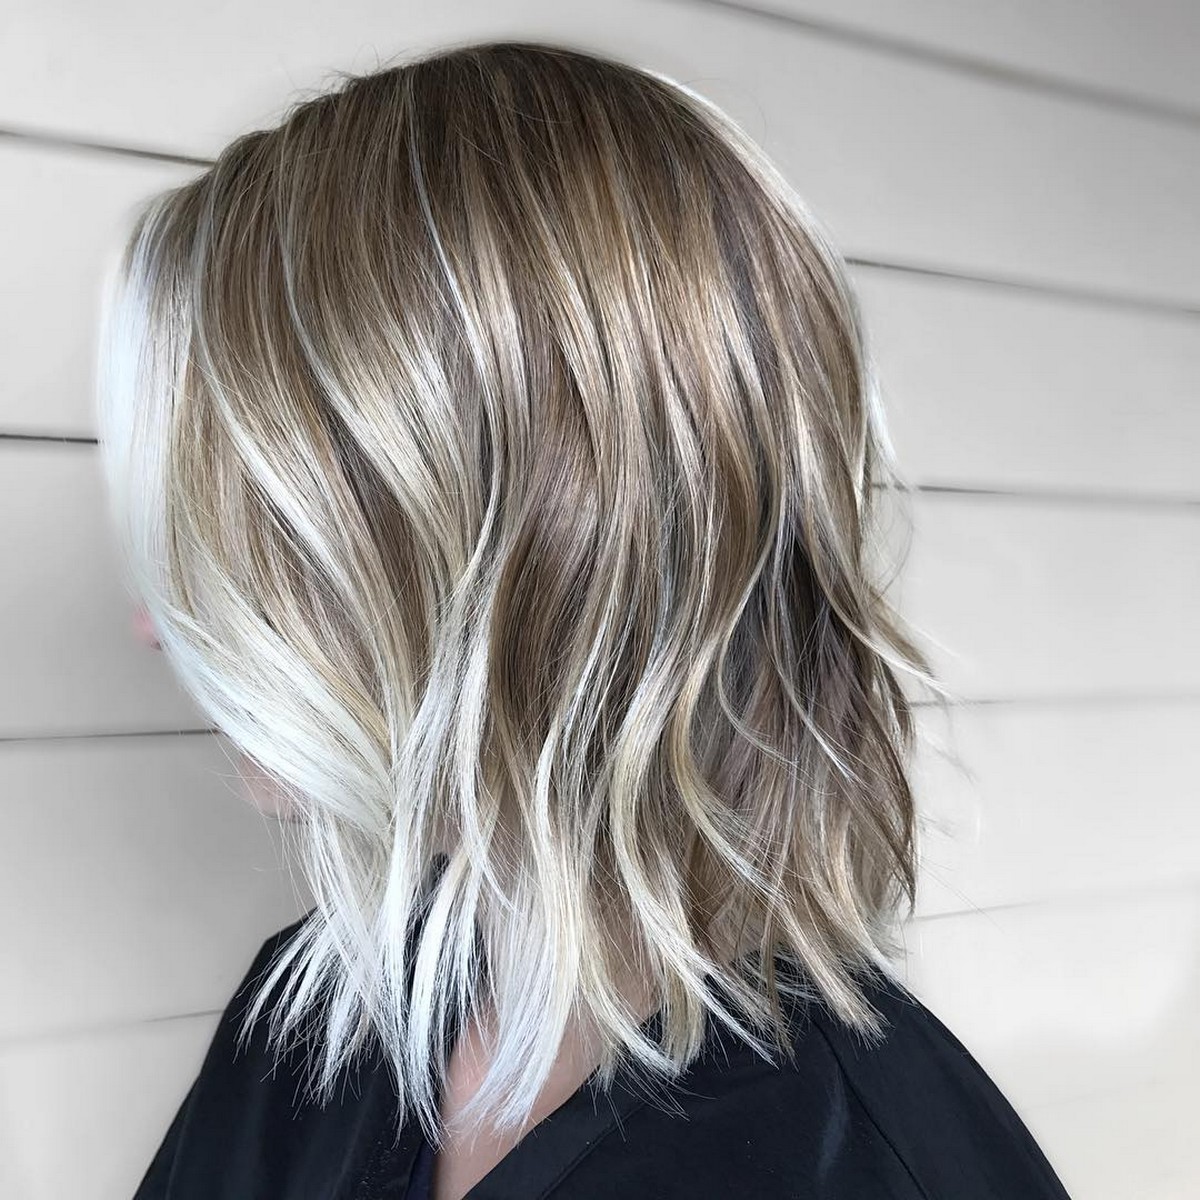 Shoulder-Length Bob With Layers